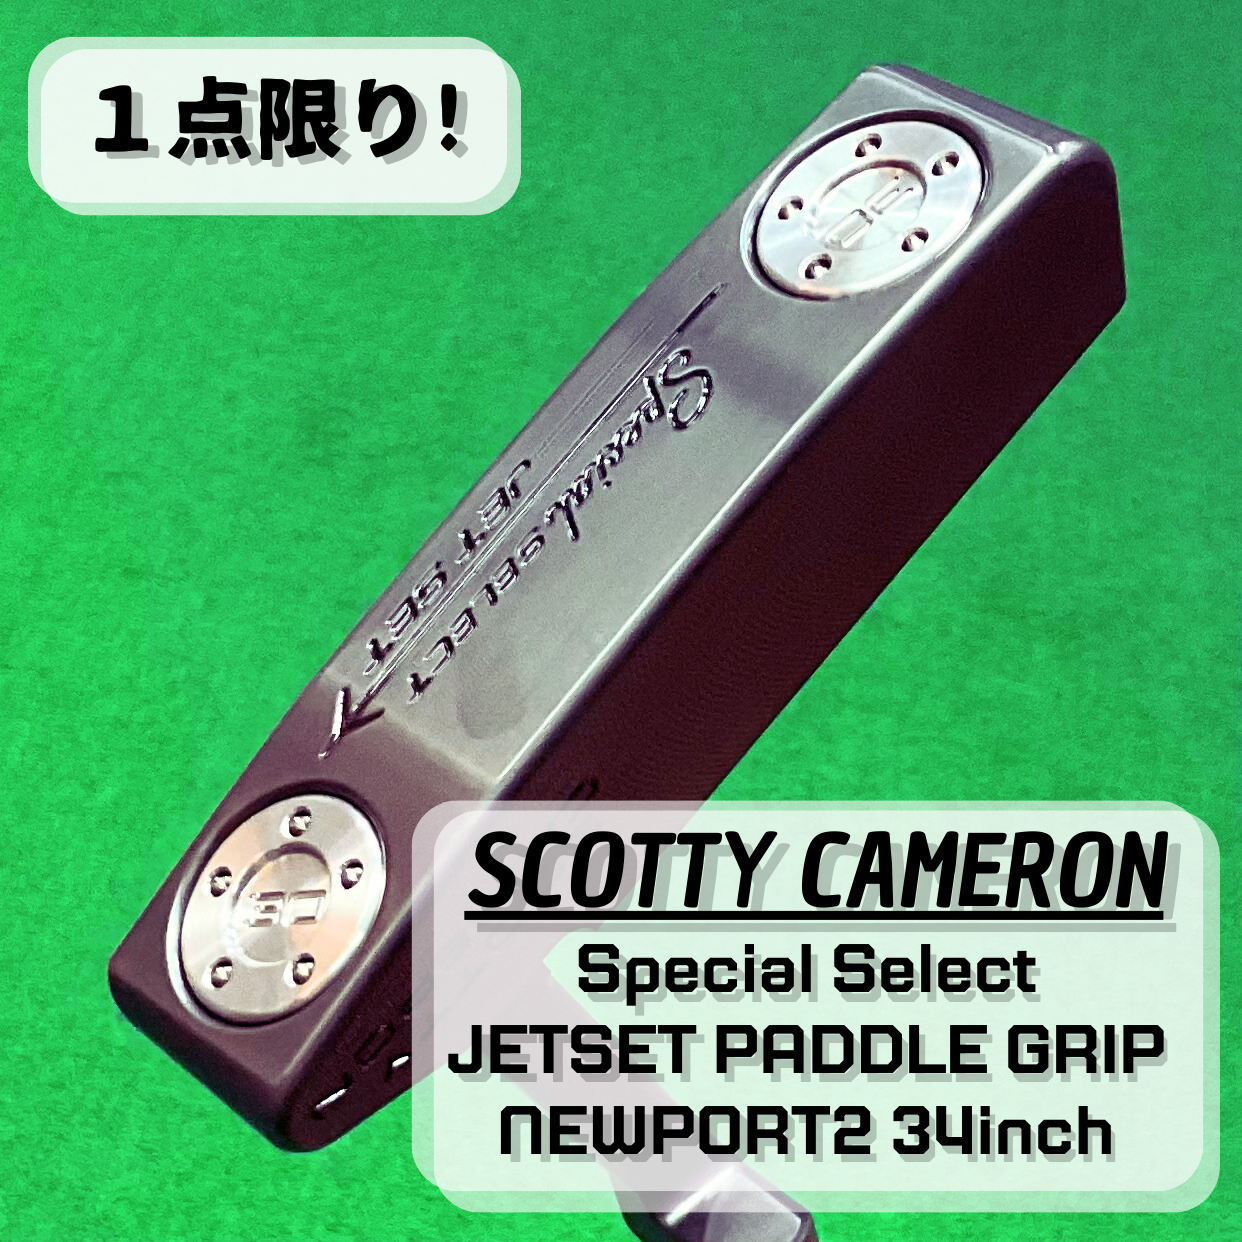 Scotty Cameron】SPECIAL SELECT JETSET PADDLE GRIP Newport2 34inch